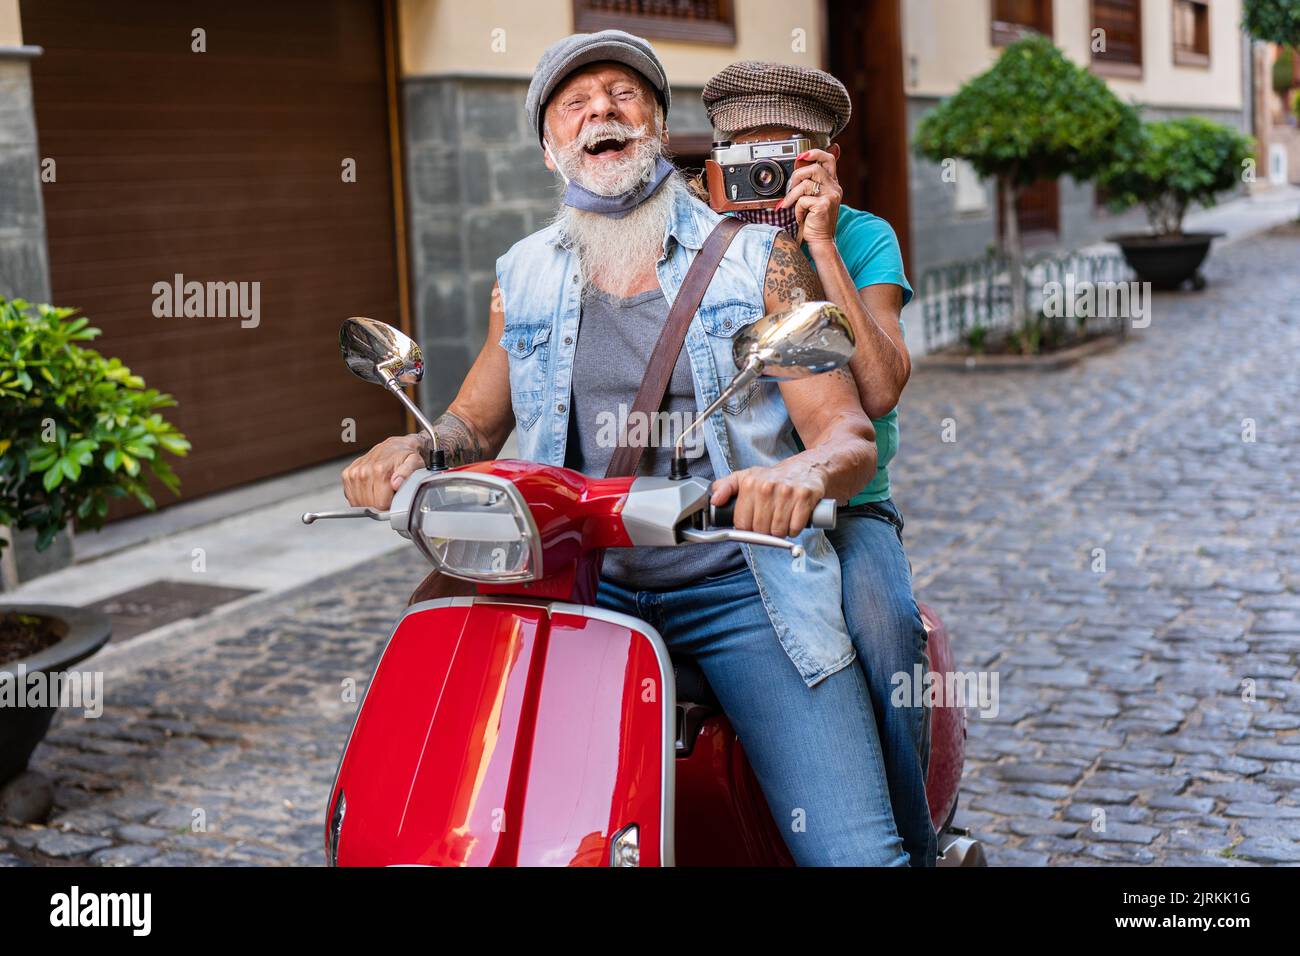 Crop of a modern senior couple with masks riding on a motorcycle and taking pictures while driving through town Stock Photo